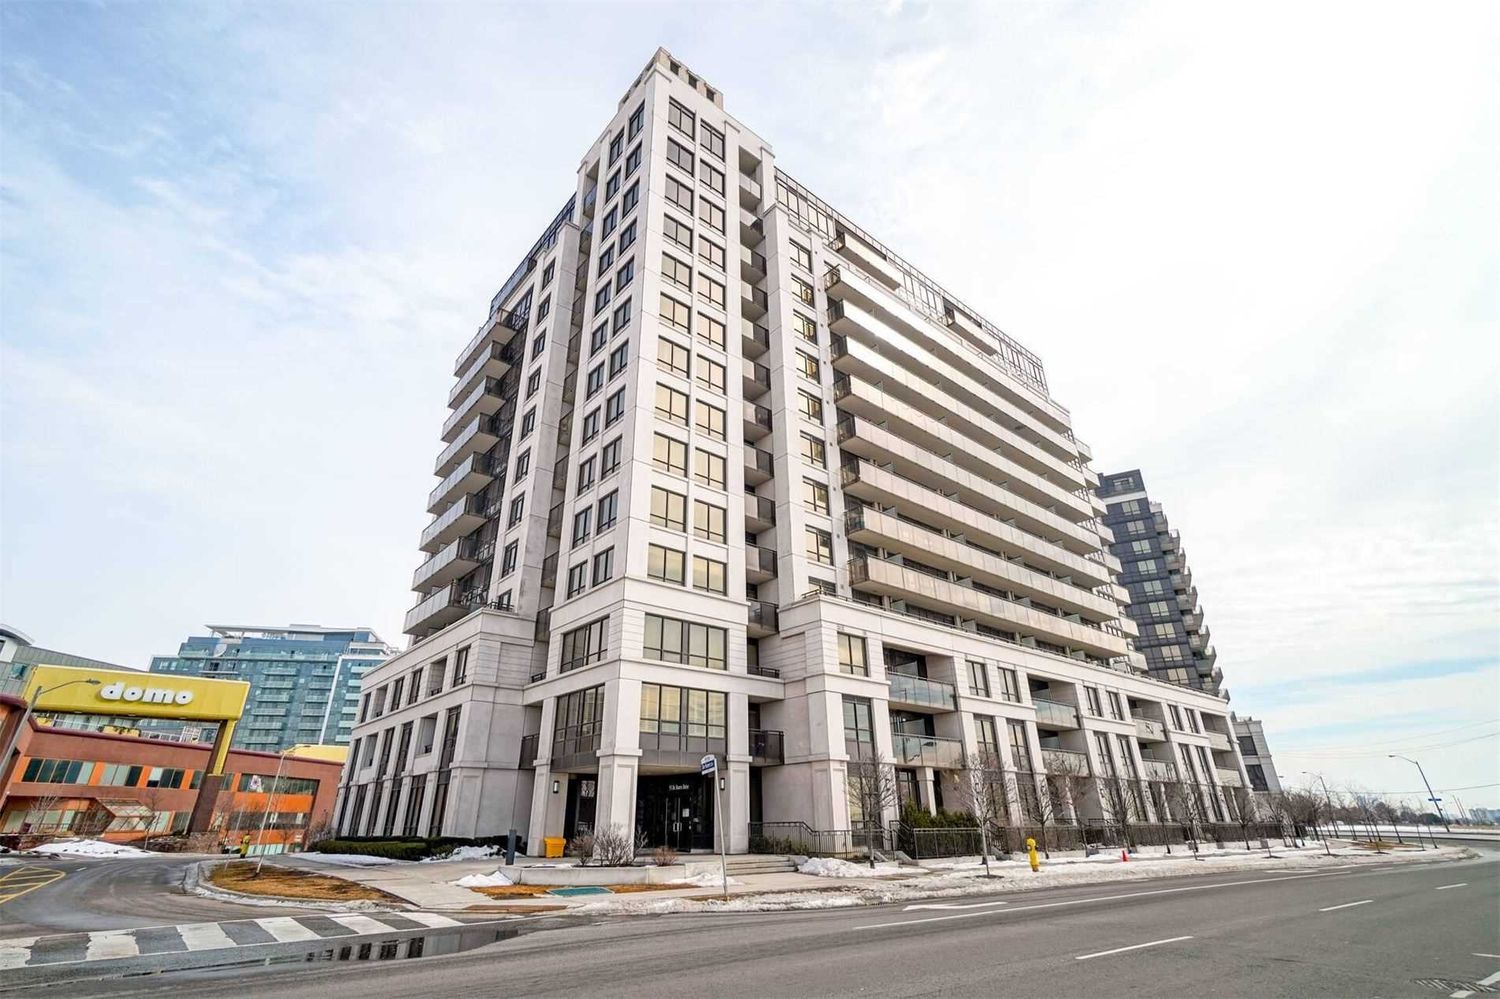 1070 Sheppard Avenue W. M1 | M2 Condos is located in  North York, Toronto - image #2 of 3